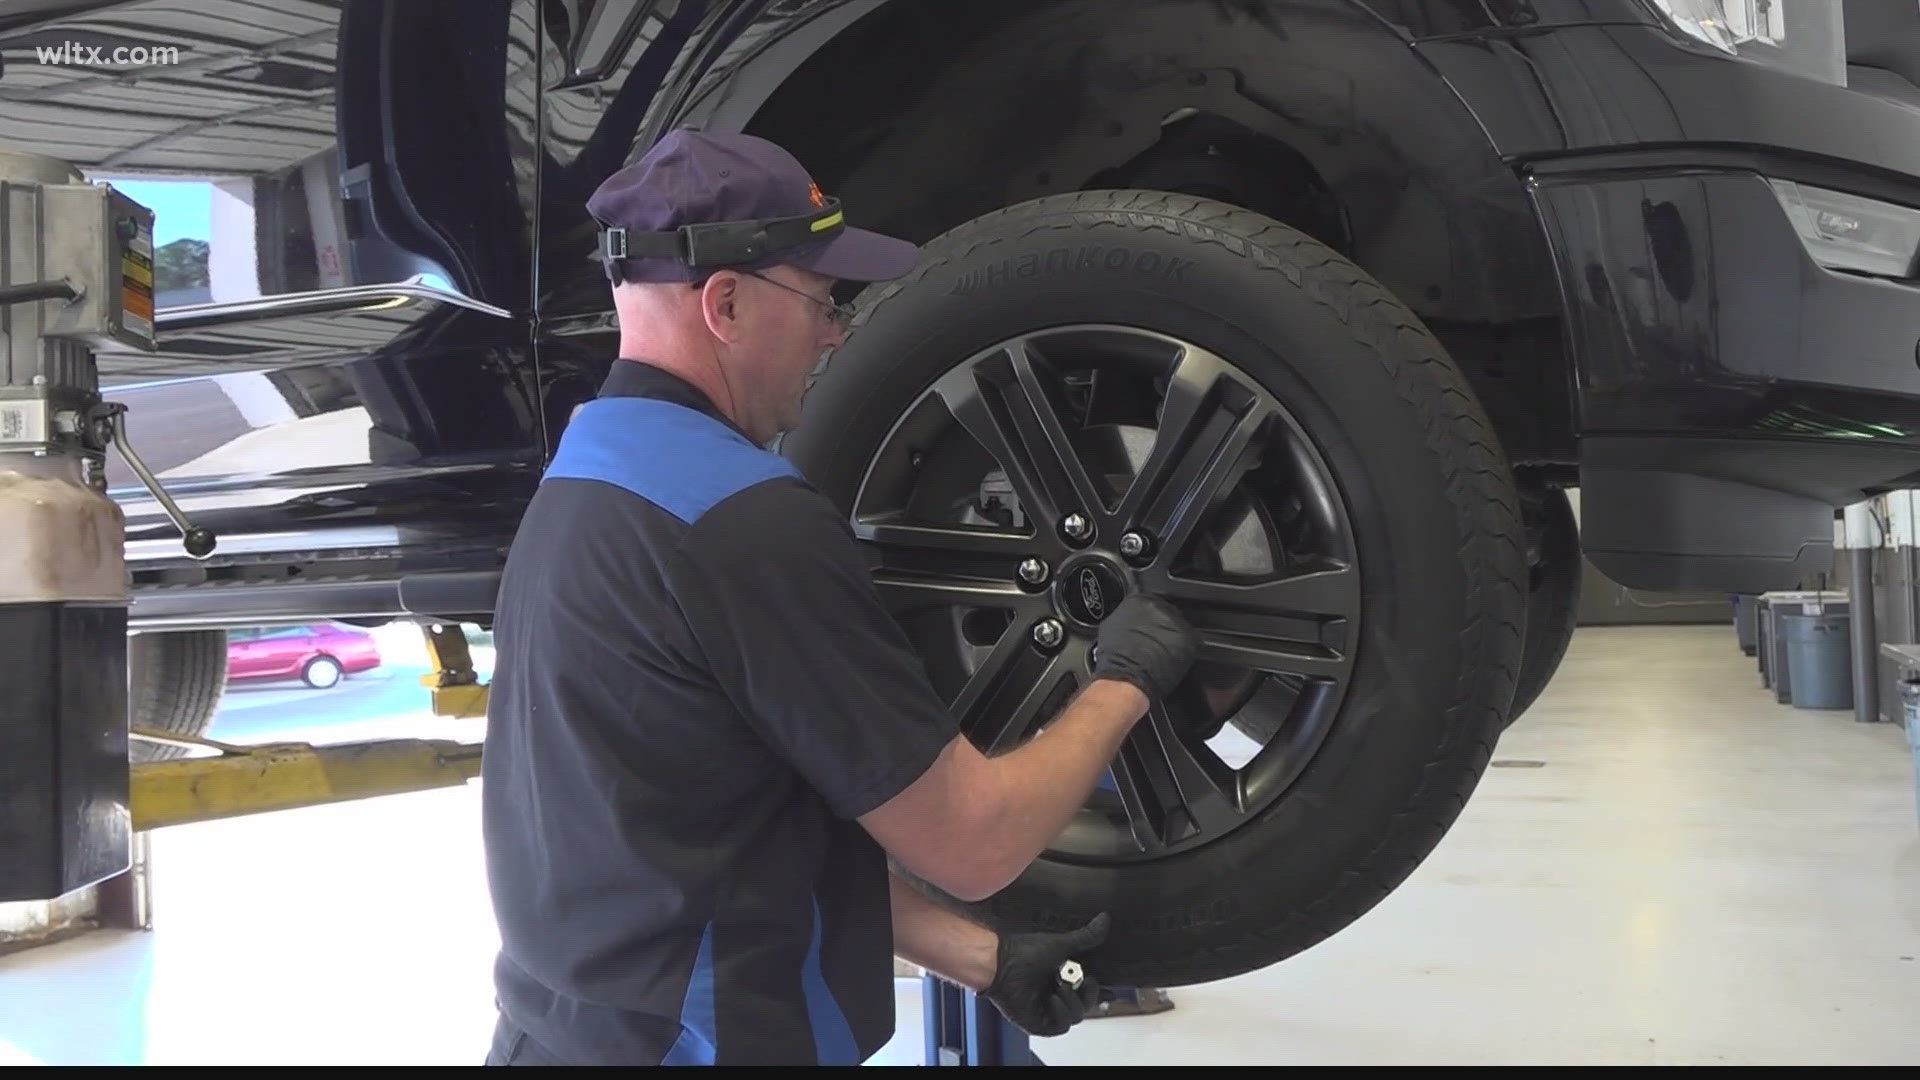 The state has over 1400 job openings for automotive technicians.